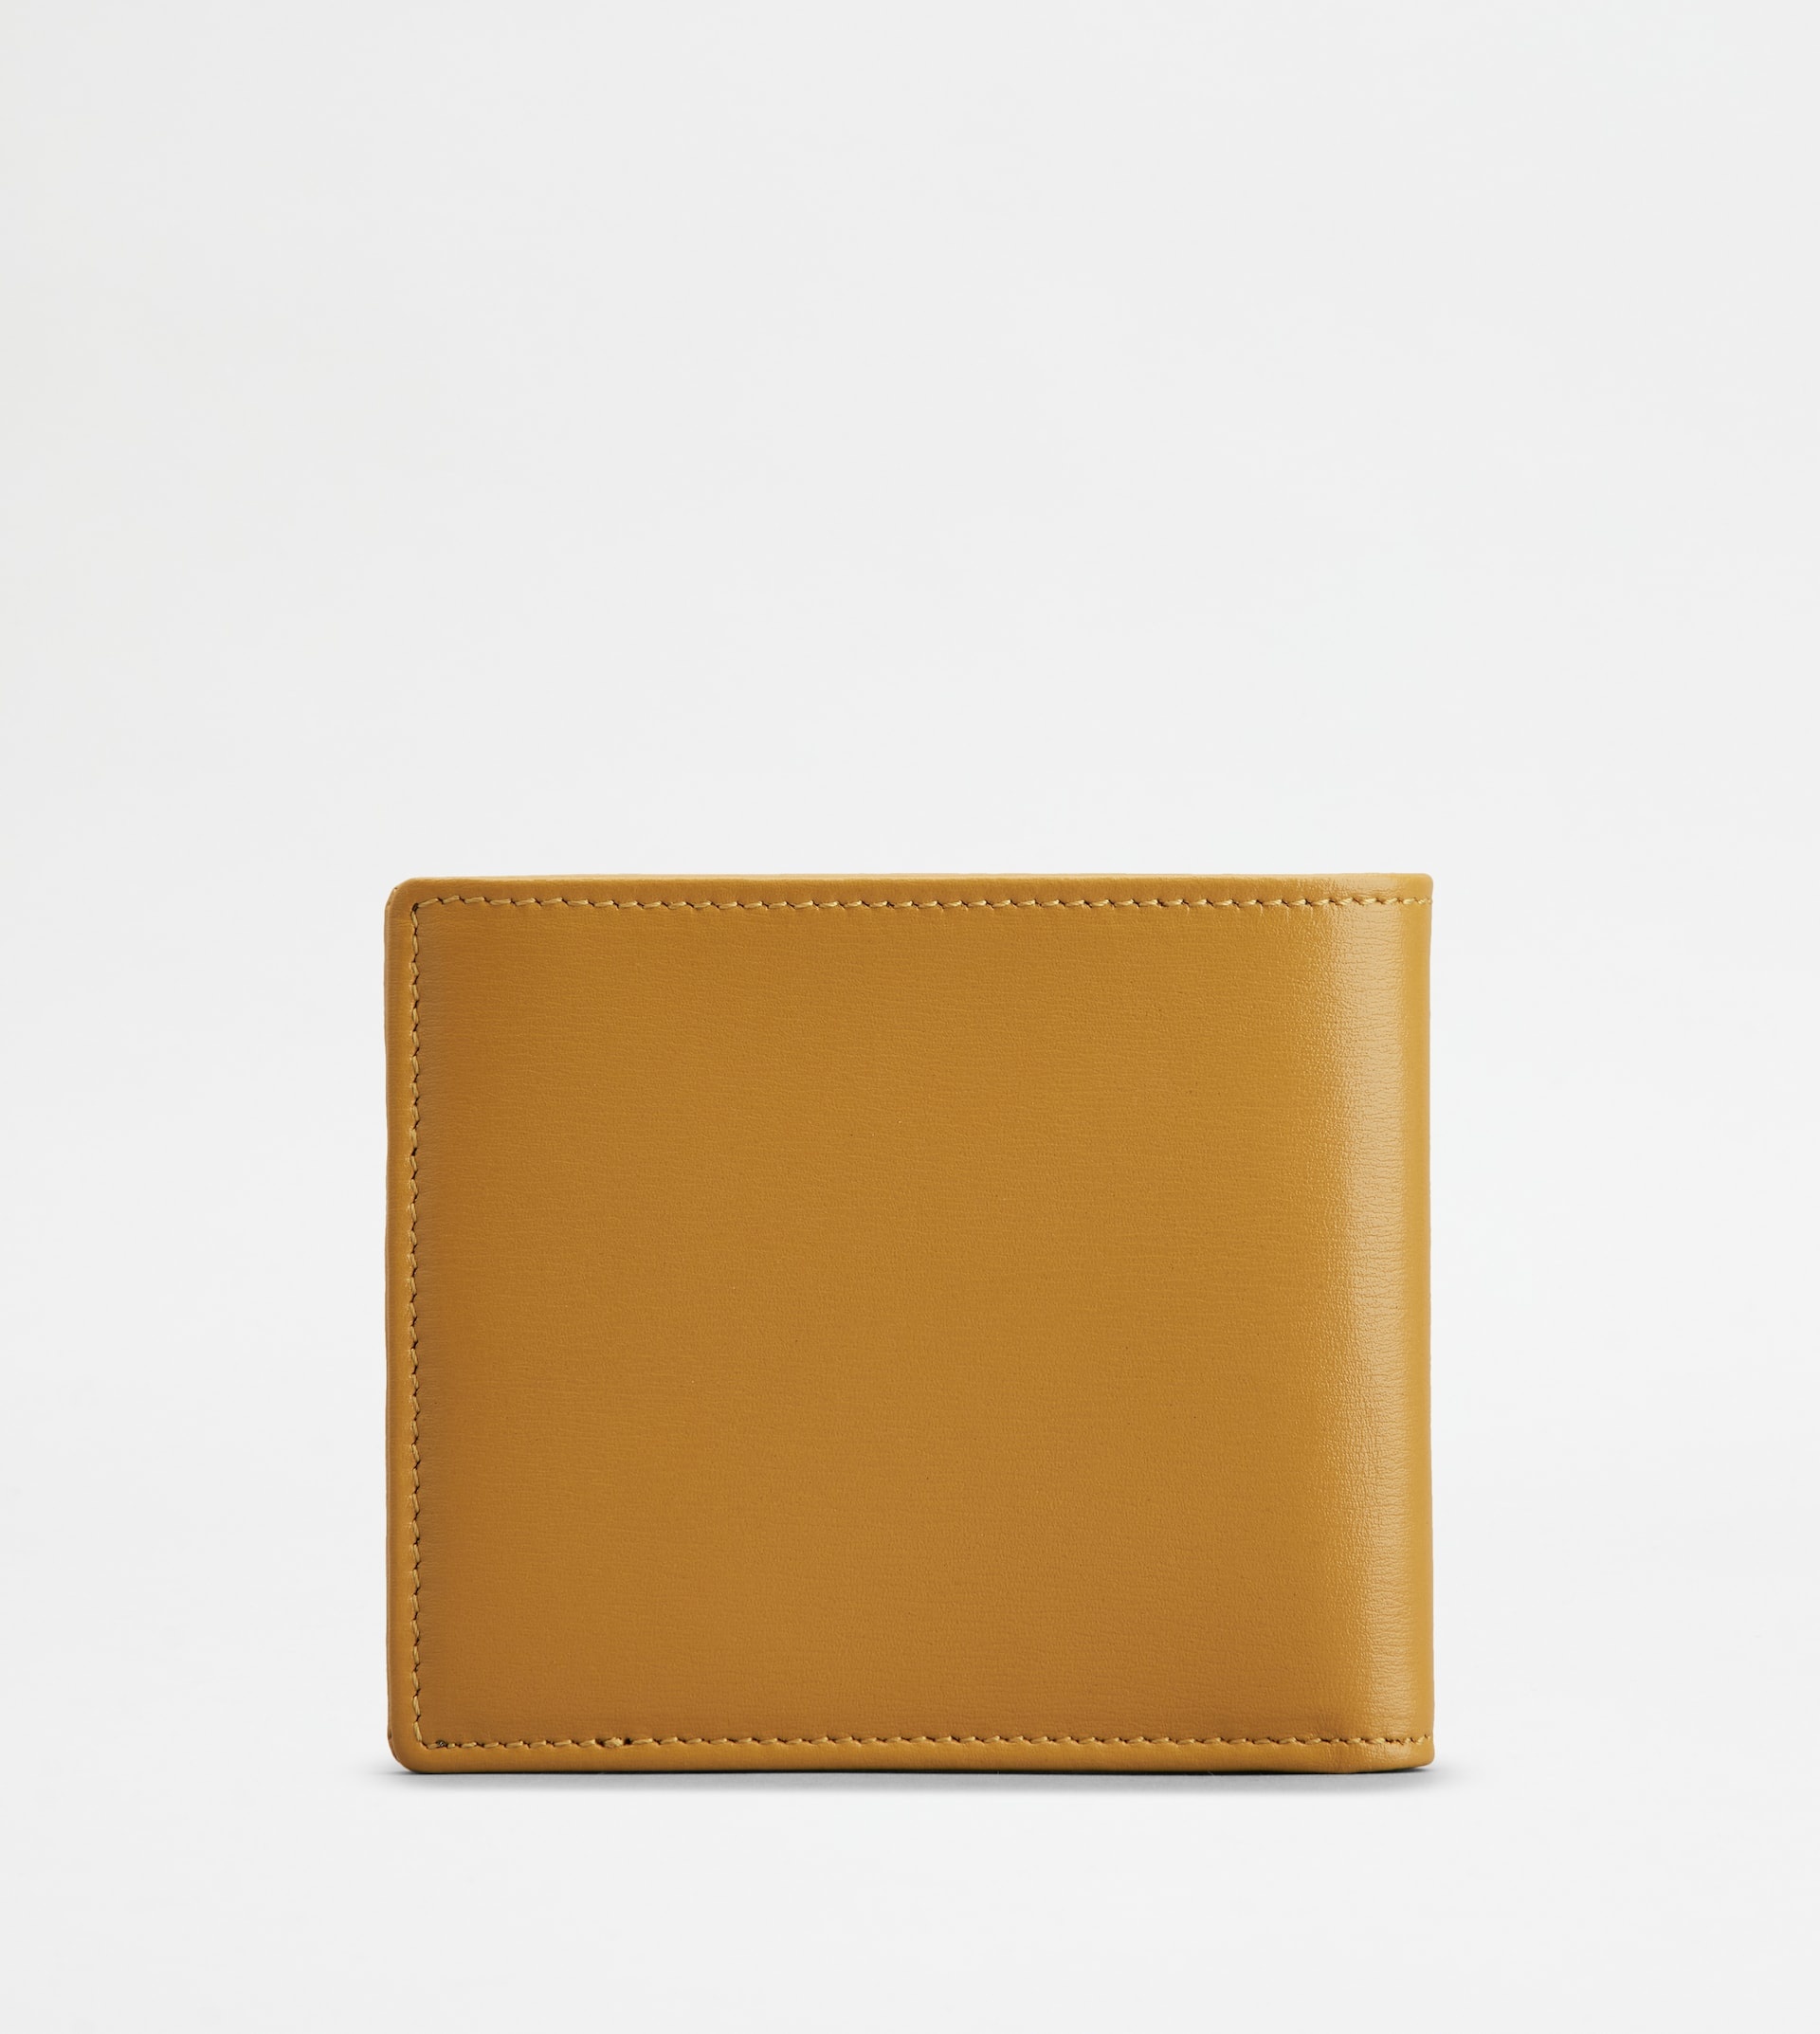 TOD'S WALLET IN LEATHER - YELLOW - 3